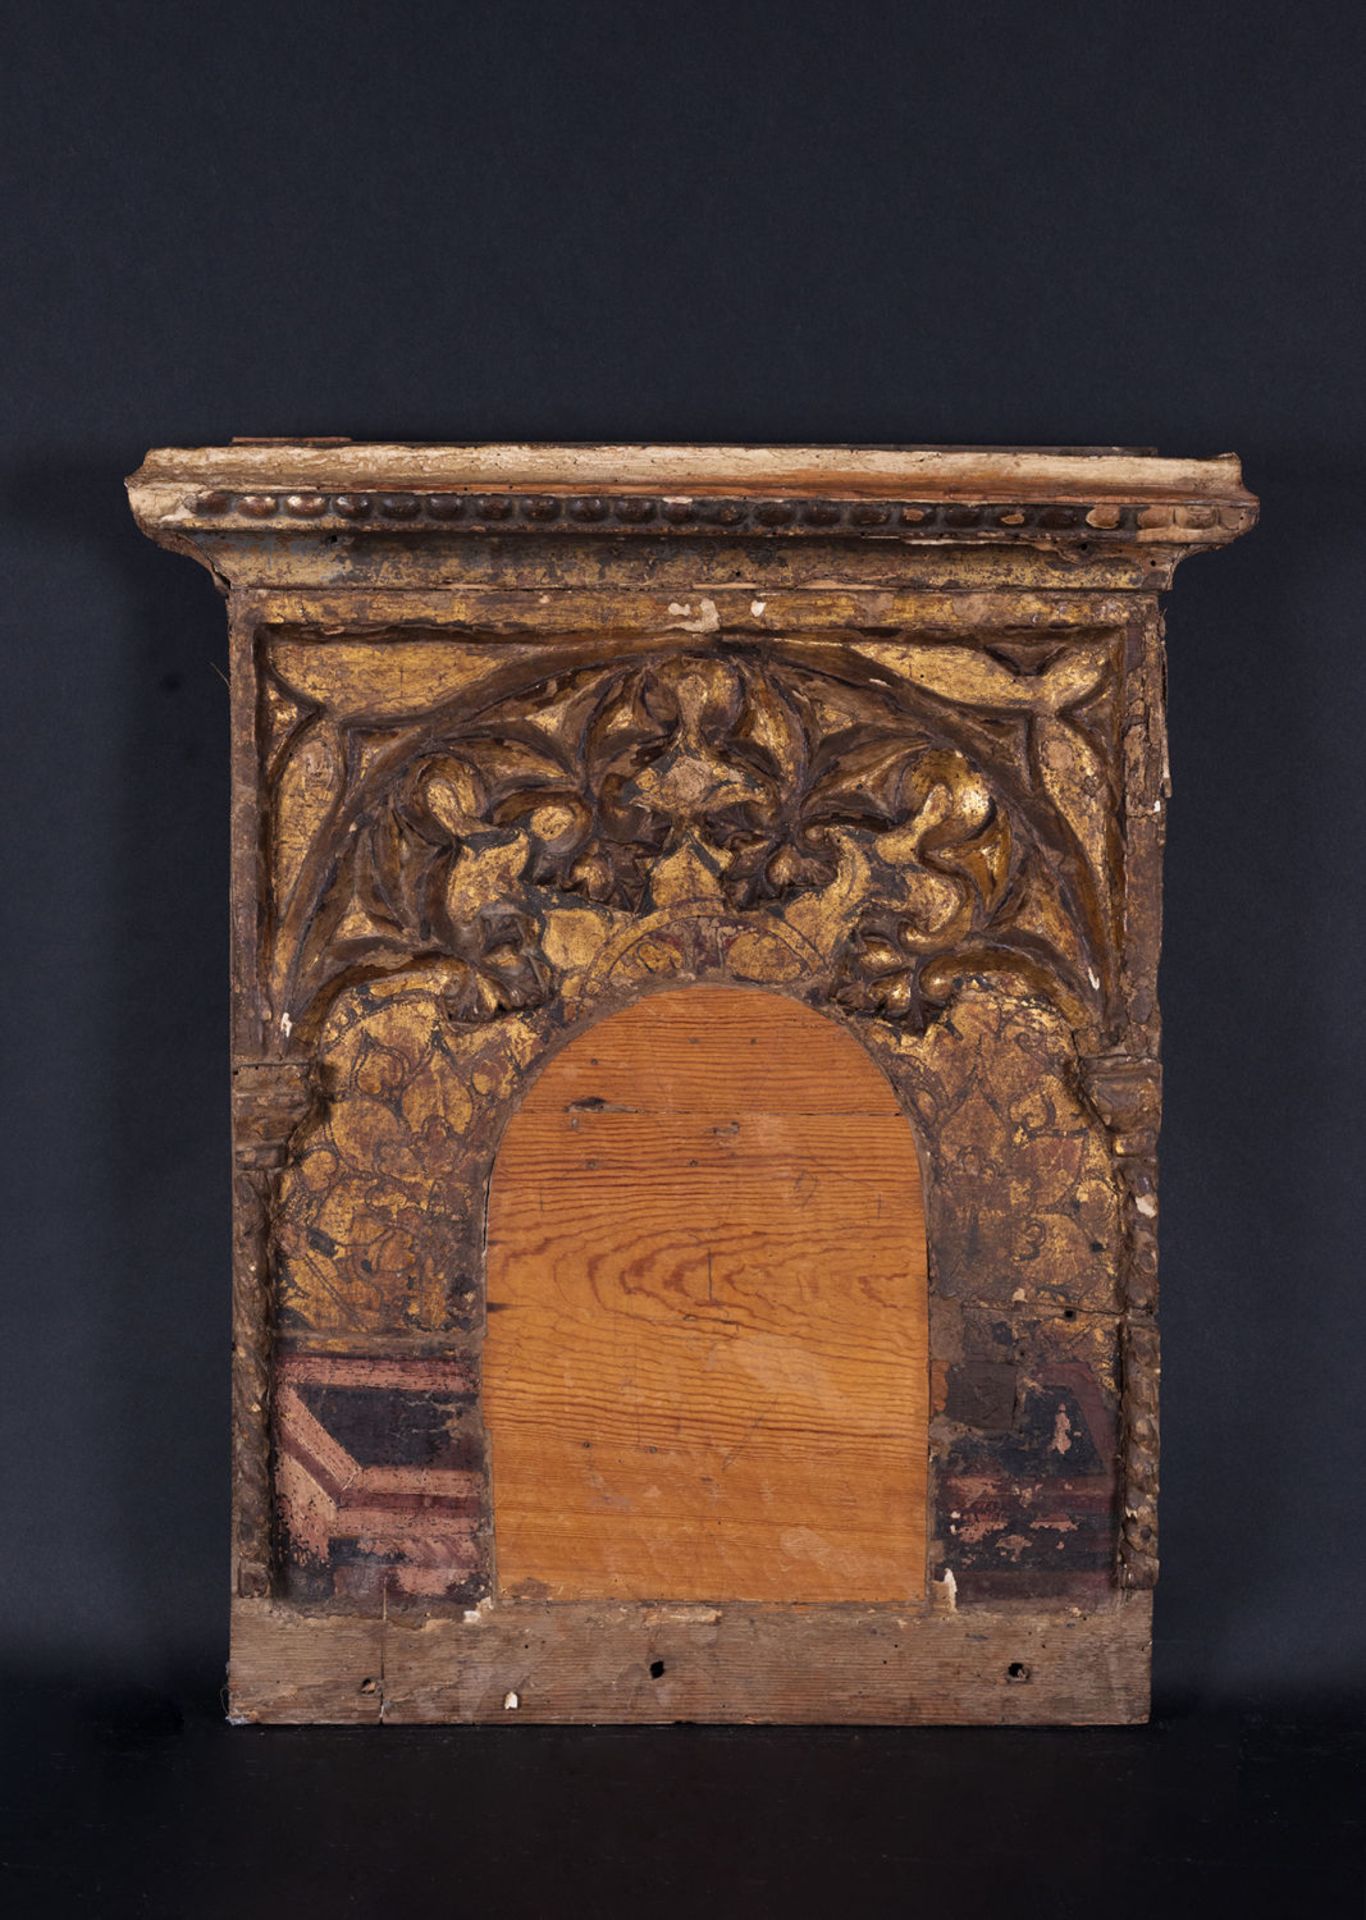 Gothic Tabernacle Door transformed into frame, 14th - 15th centuries